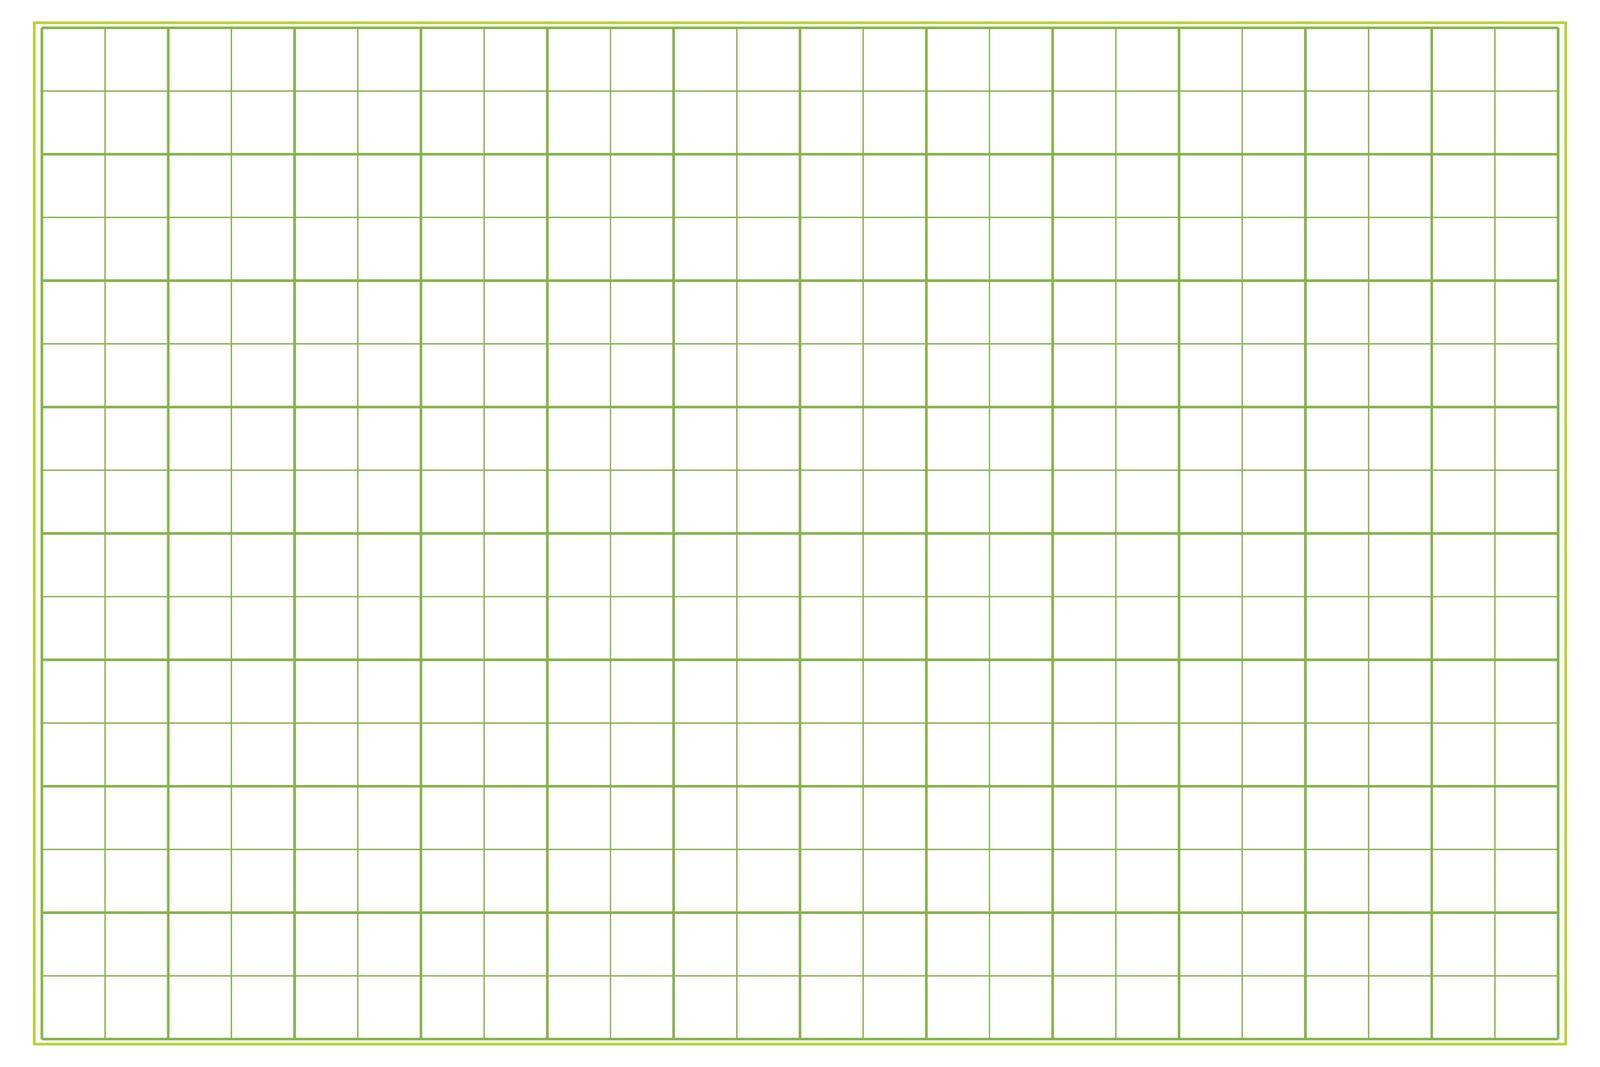 Millimeter graph paper grid. Abstract squared background. Geometric pattern for school, technical engineering line scale measurement. Lined blank for education isolated on transparent background by allaku